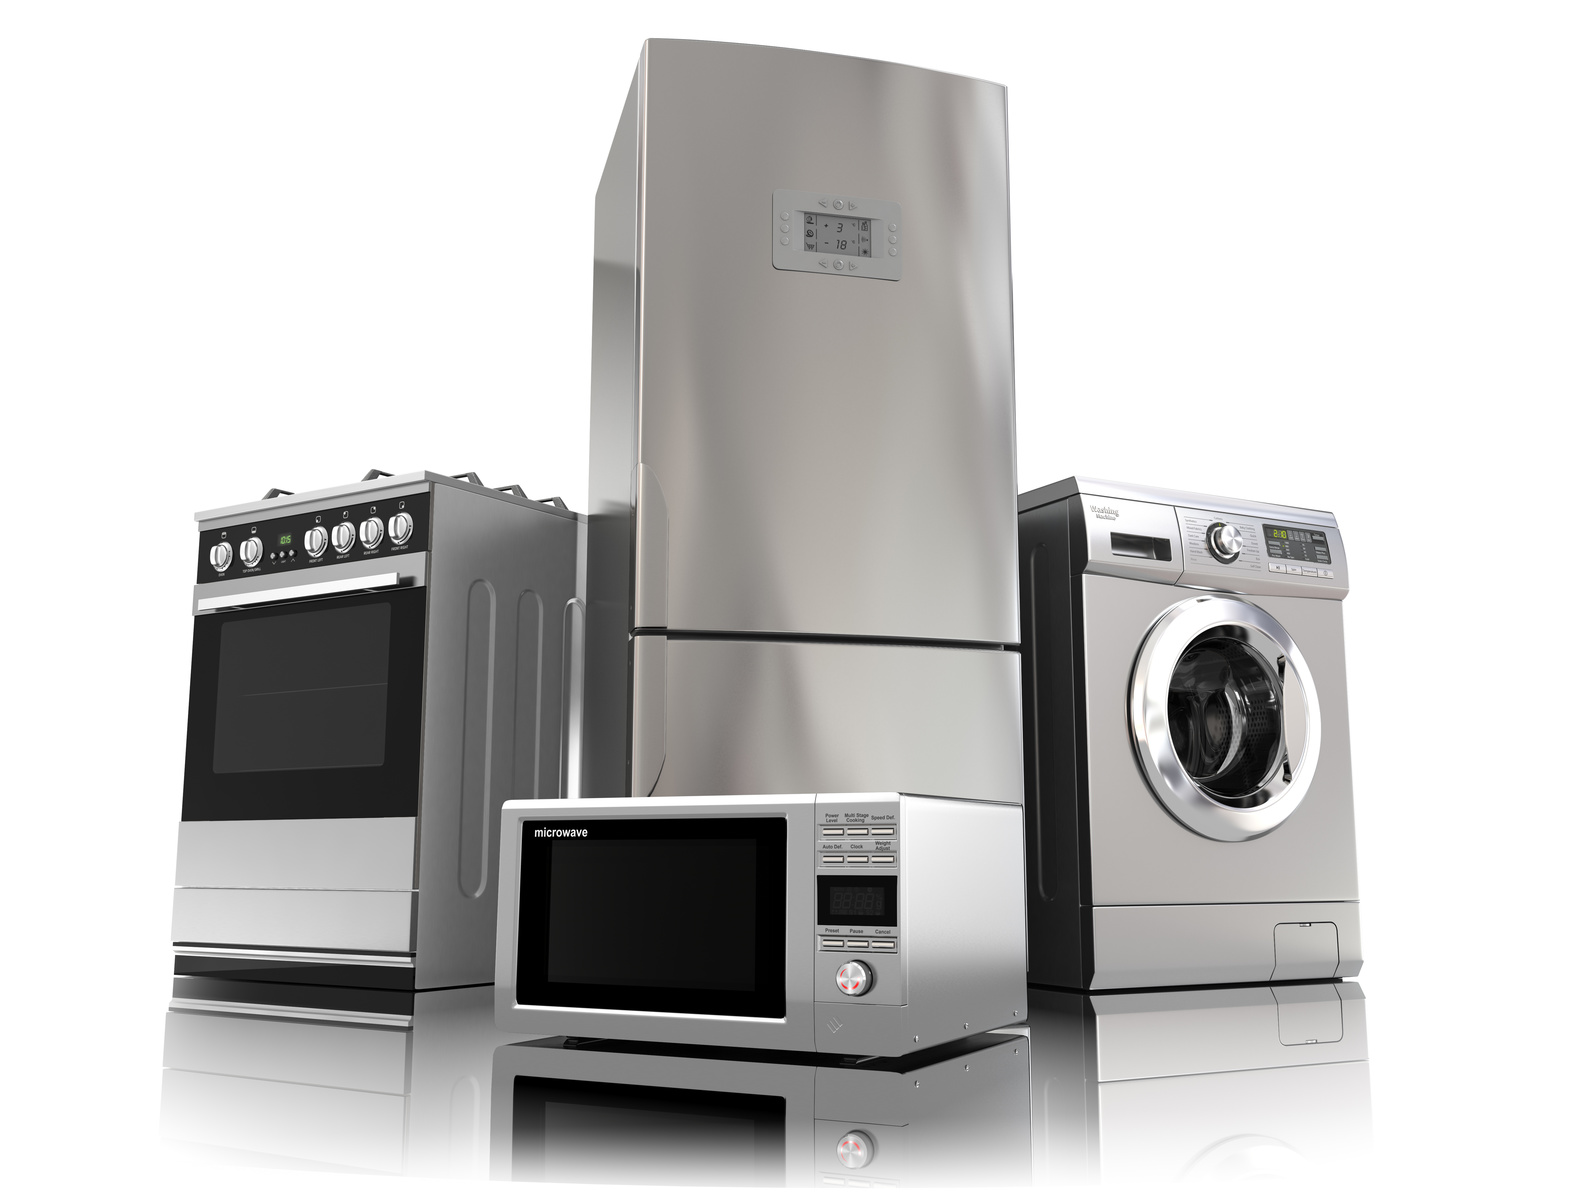 Keep Your Home Appliances Covered With This Coverage ...